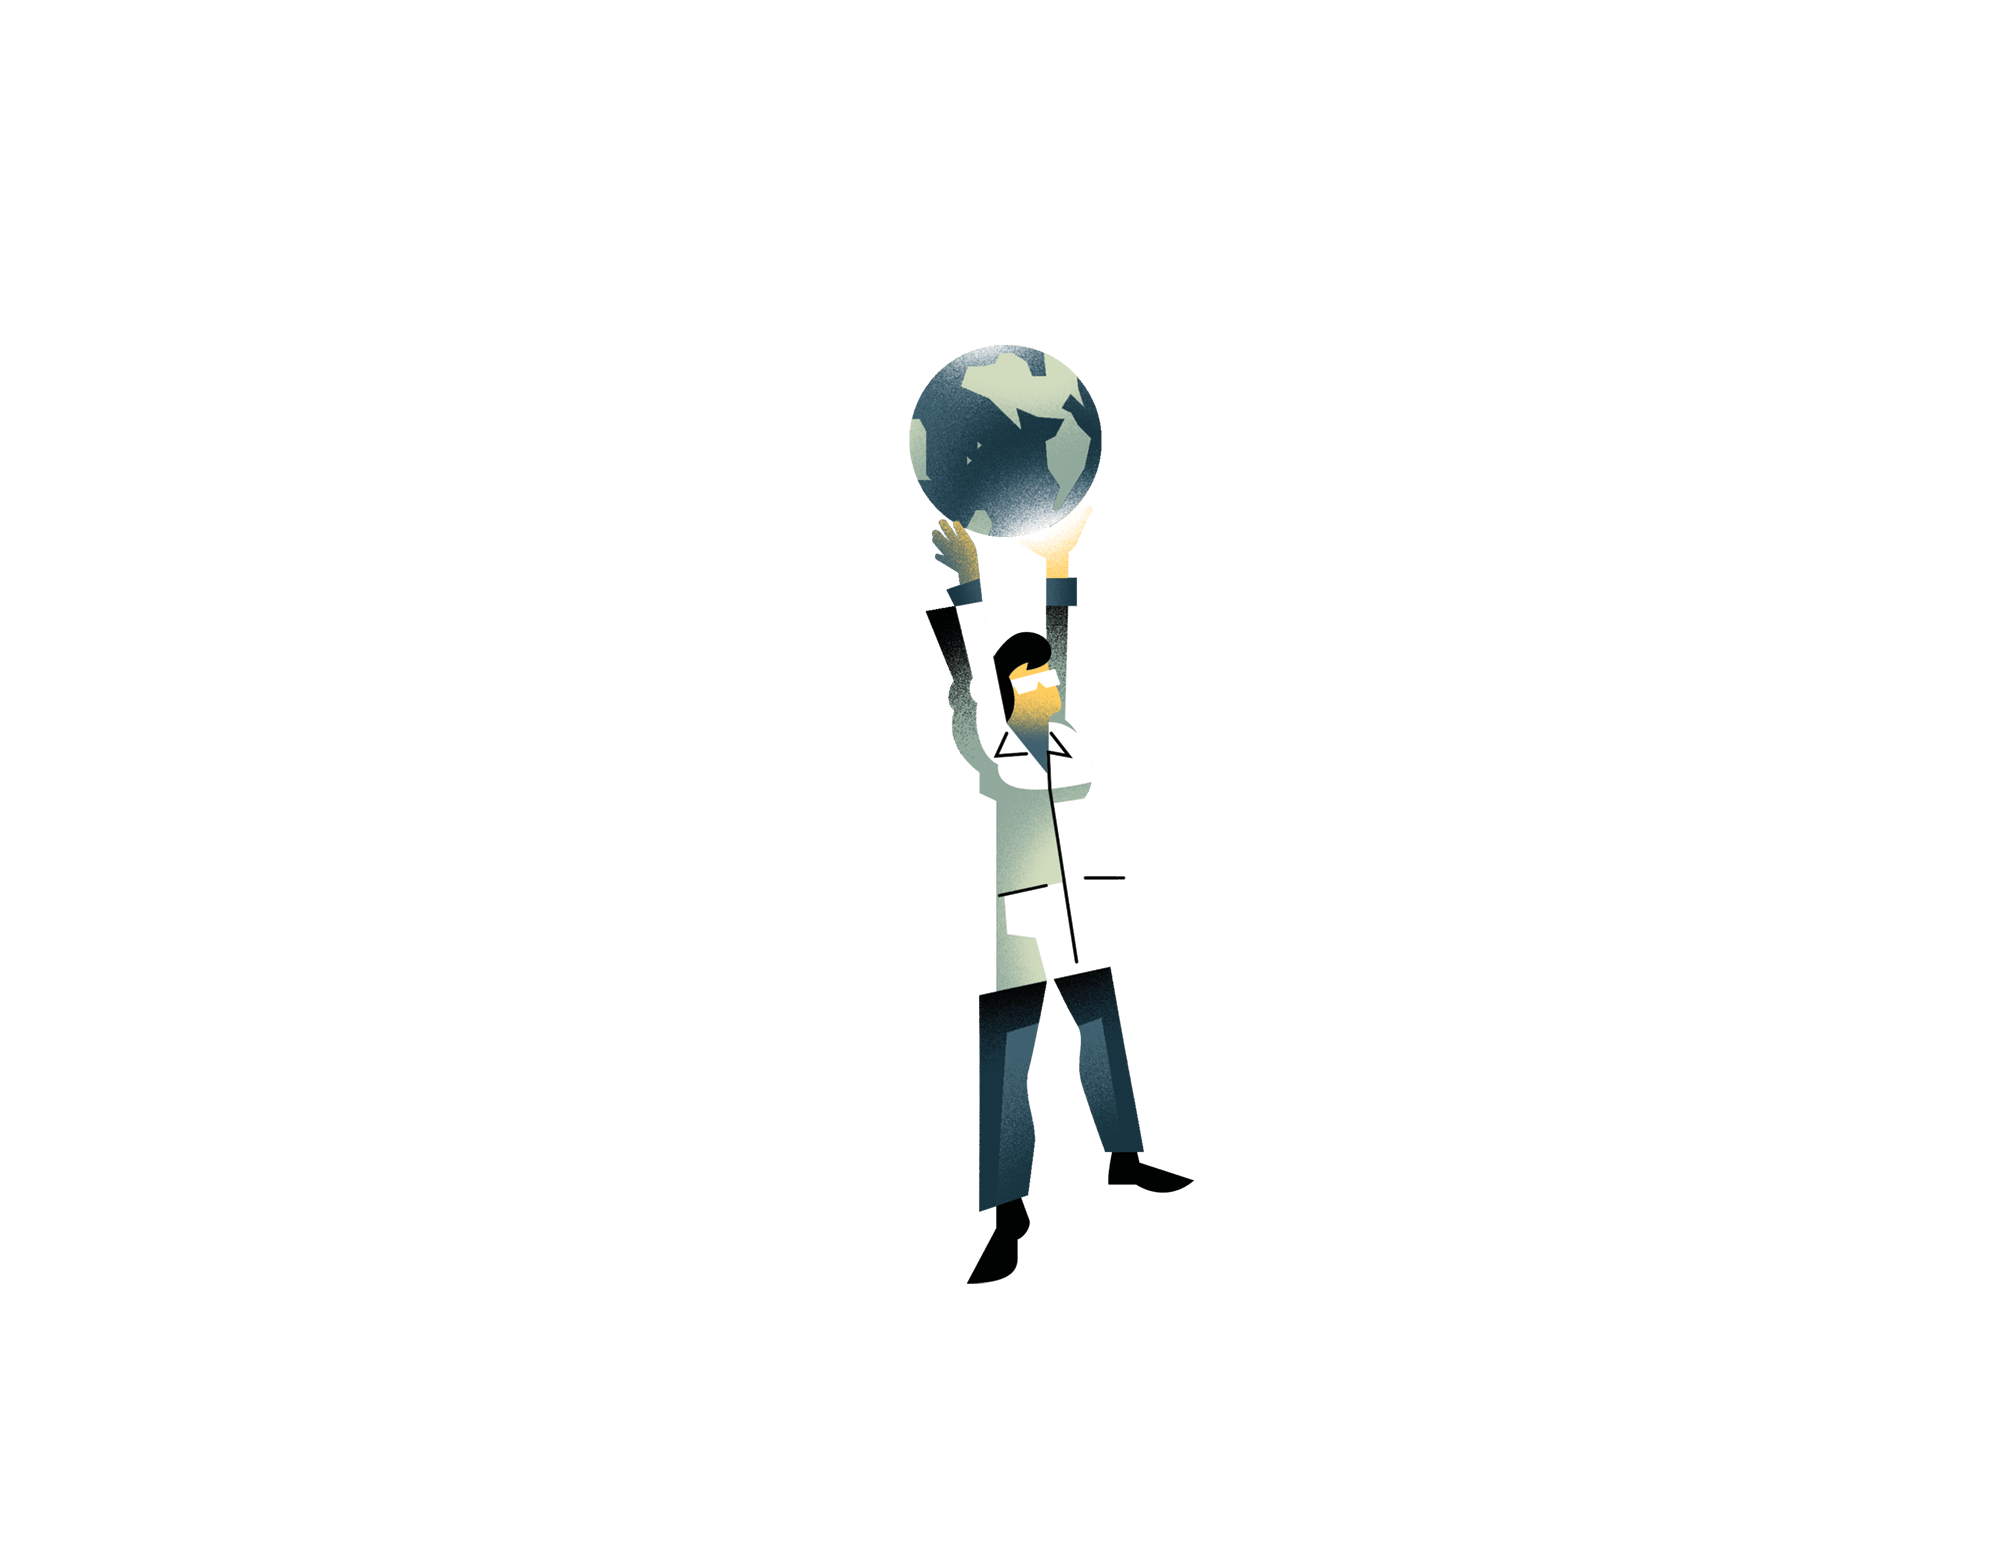 Illustration of a scientist holding a globe above his head